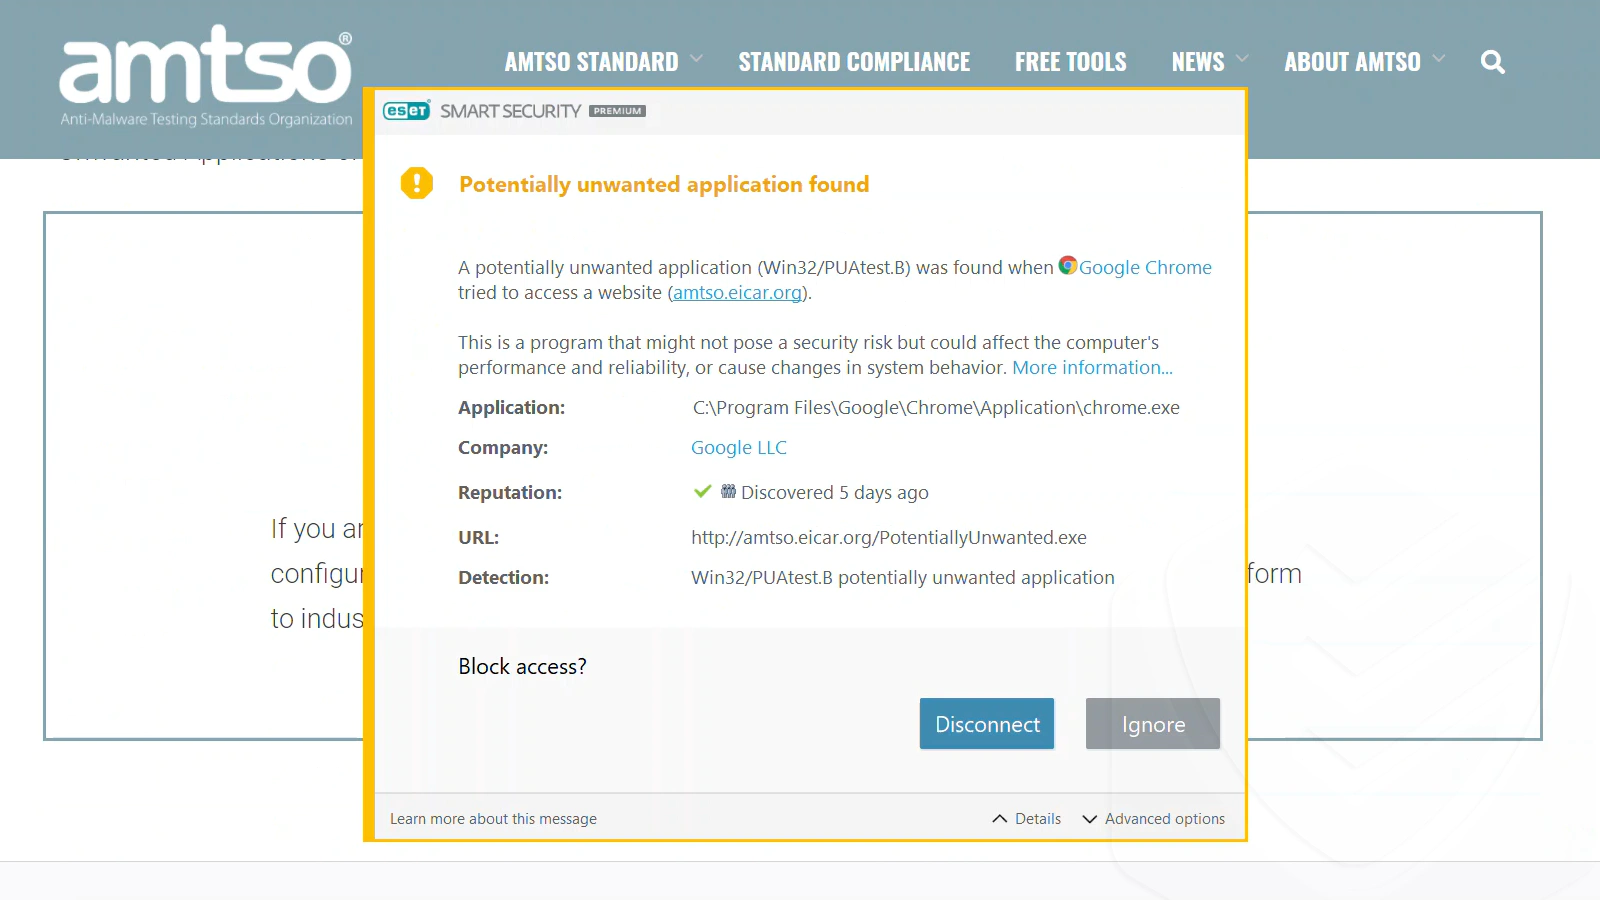 Eset Potentially unwanted applications found